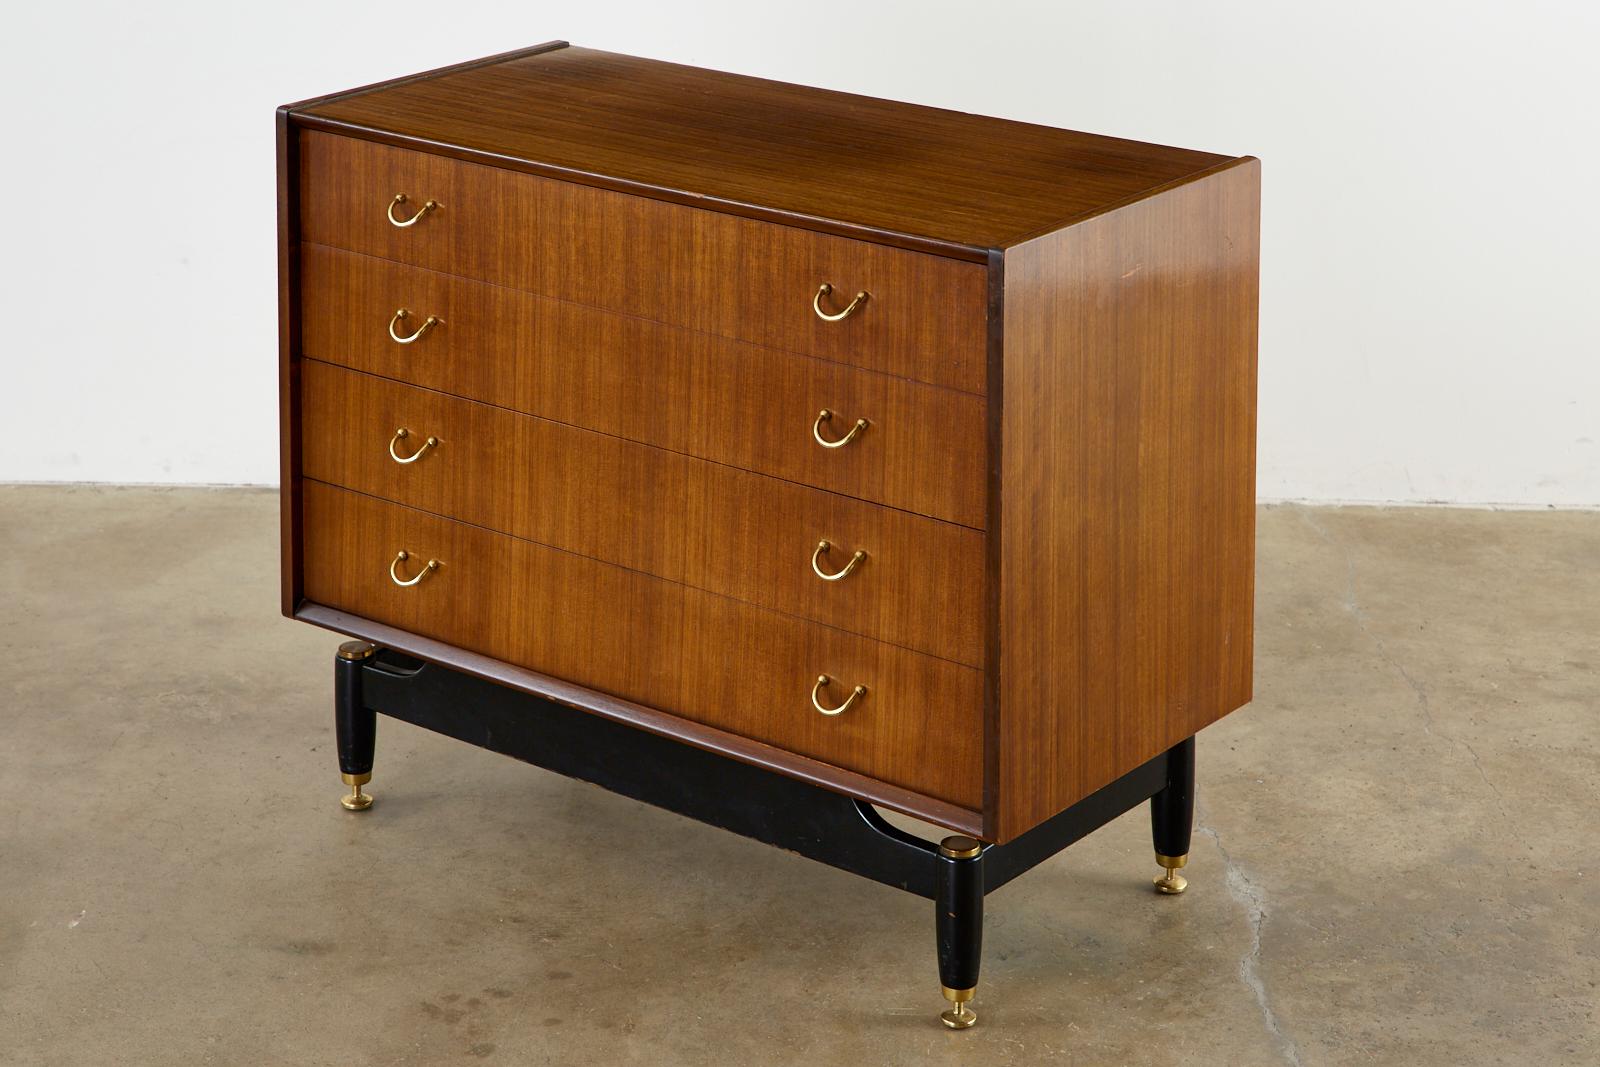 Stylish Mid-Century Modern commode or chest of drawers designed in England by G-plan for Wolfe and Hollander, London. The beautiful teak case has four large storage drawers fitted with brass pulls and is supported by an ebonized wood base having